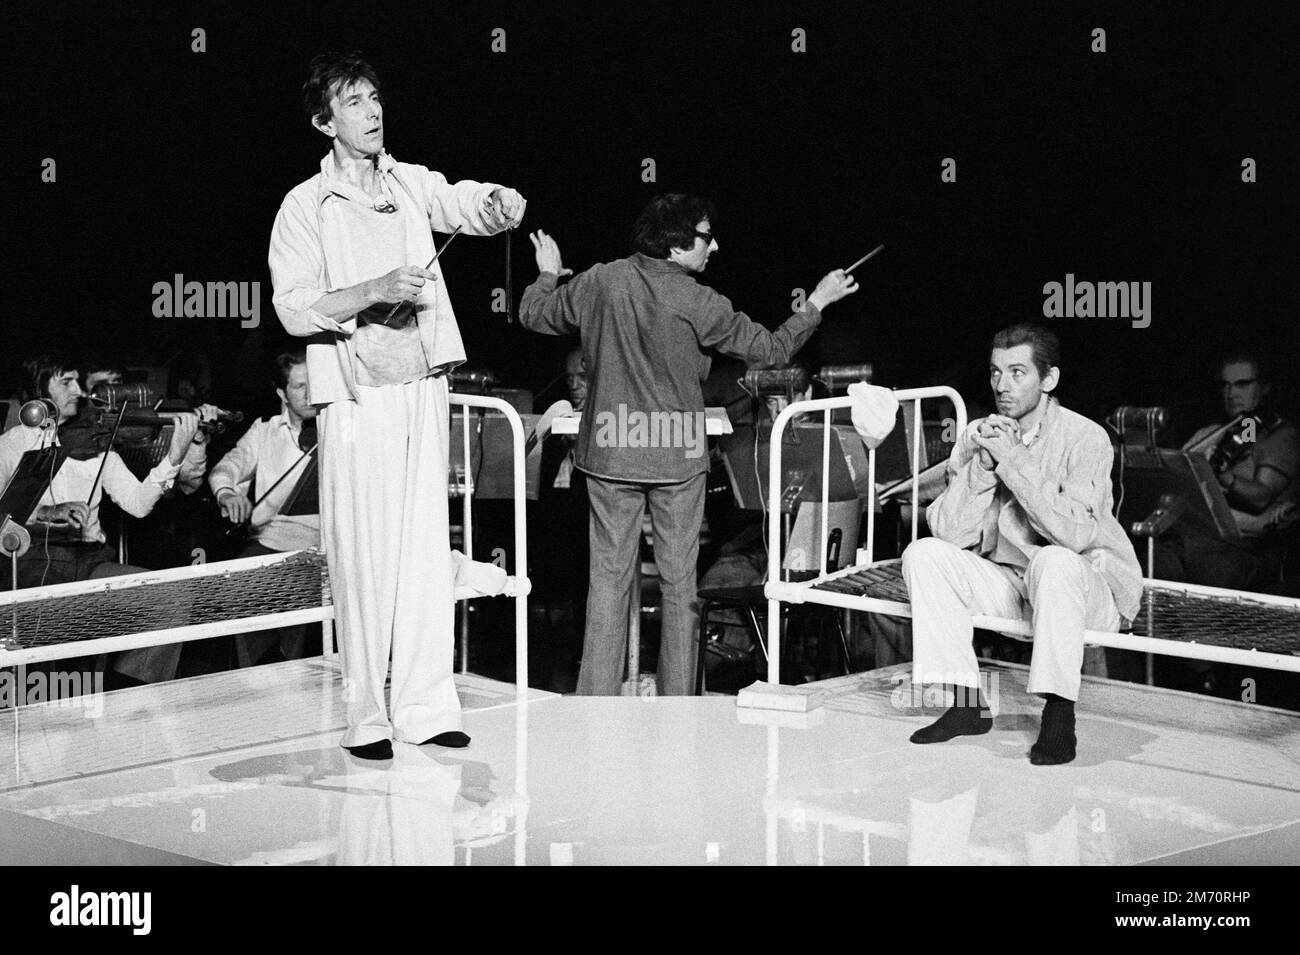 l-r: John Wood (Ivanov), Andre Previn (composer / conductor), Ian McKellen (Alexander) in EVERY GOOD BOY DESERVES FAVOUR by Tom Stoppard and Andre Previn at the Royal Festival Hall, London SE1  01/07/1977  a Royal Shakespeare Company (RSC) production  design: Ralph Koltai  director: Trevor Nunn Stock Photo